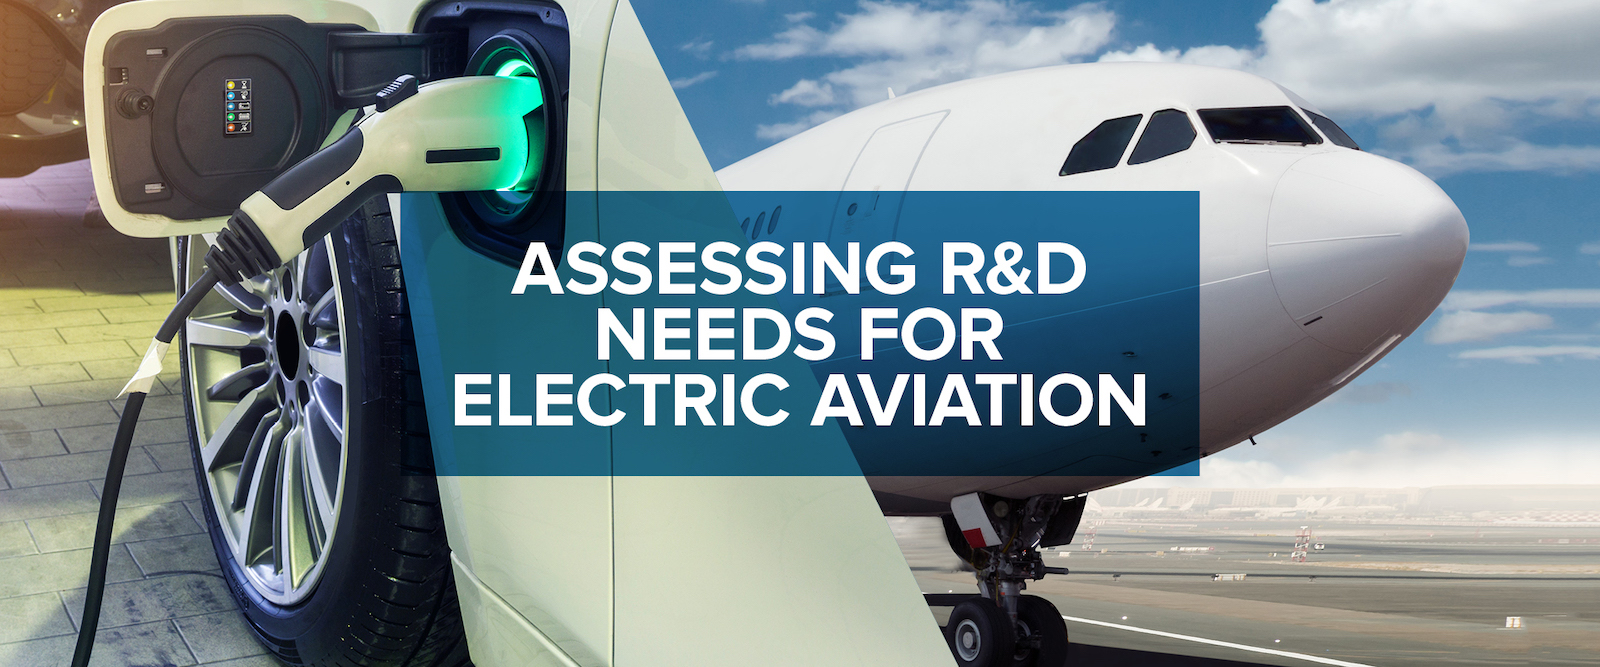 Airplane photograph with text box superimposed with "ASSESSING R&D NEEDS FOR ELECTRIC AVIATION." (Image by Argonne National Laboratory.)